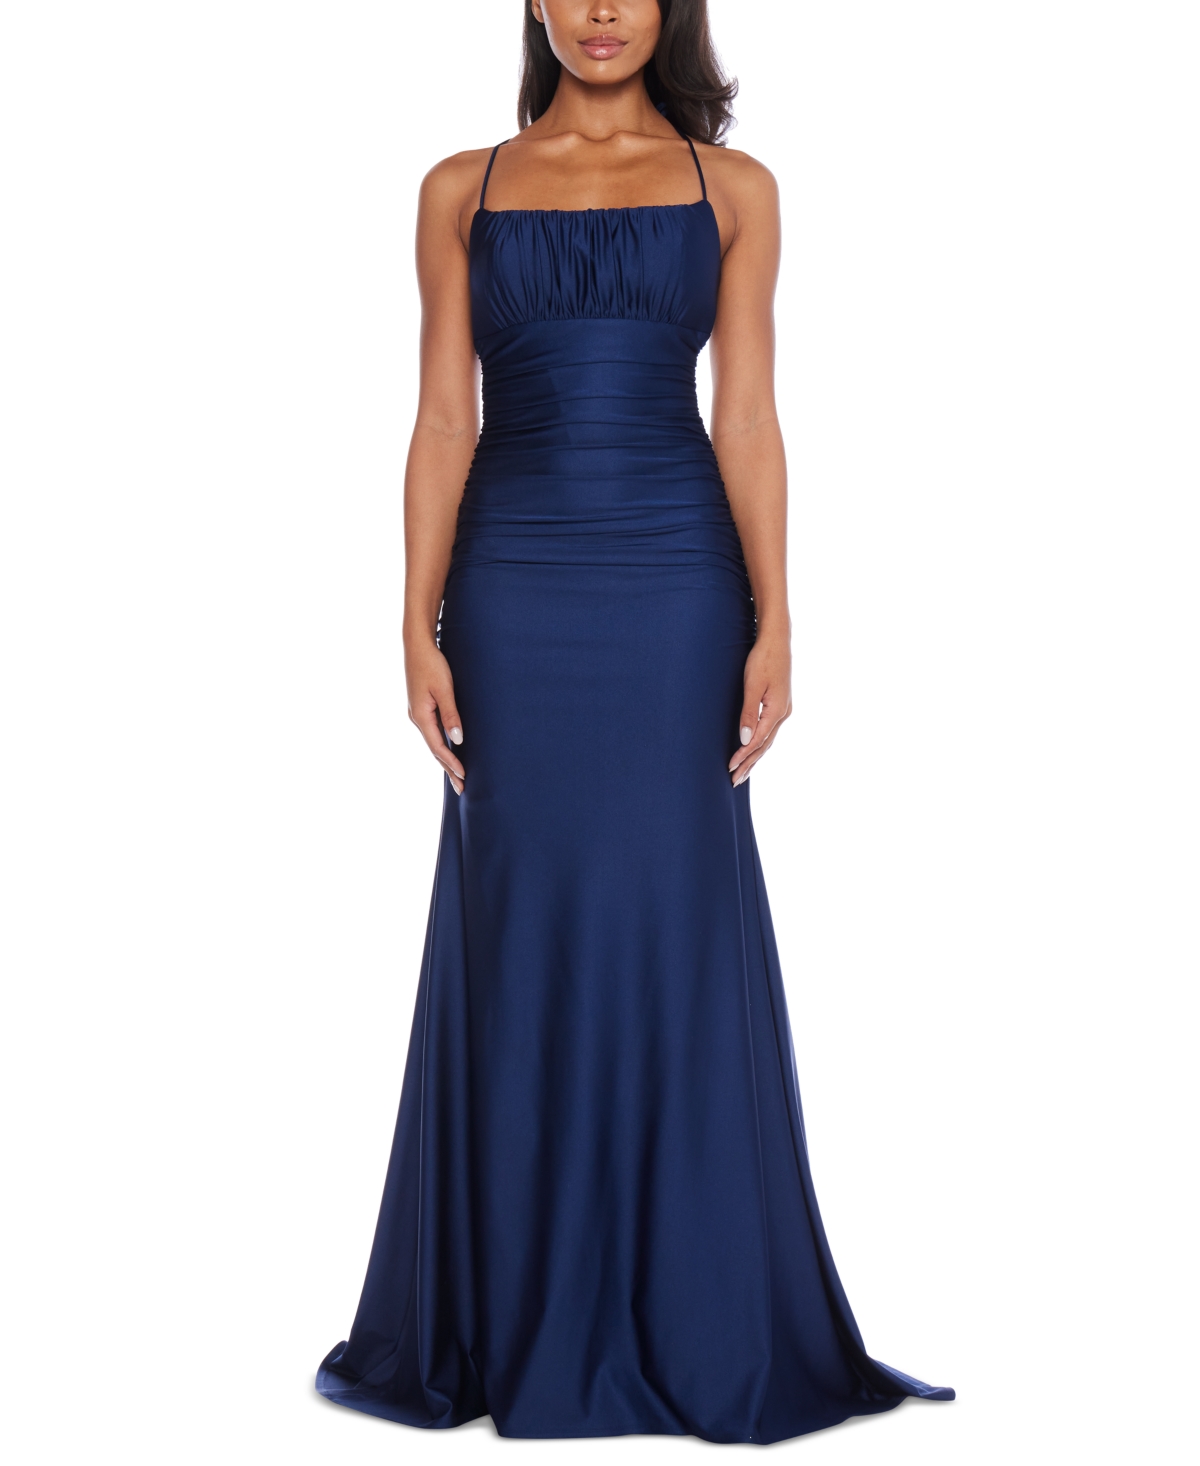 B Darlin Juniors' Square-neck Ruched Strappy Sleeveless Gown In Navy